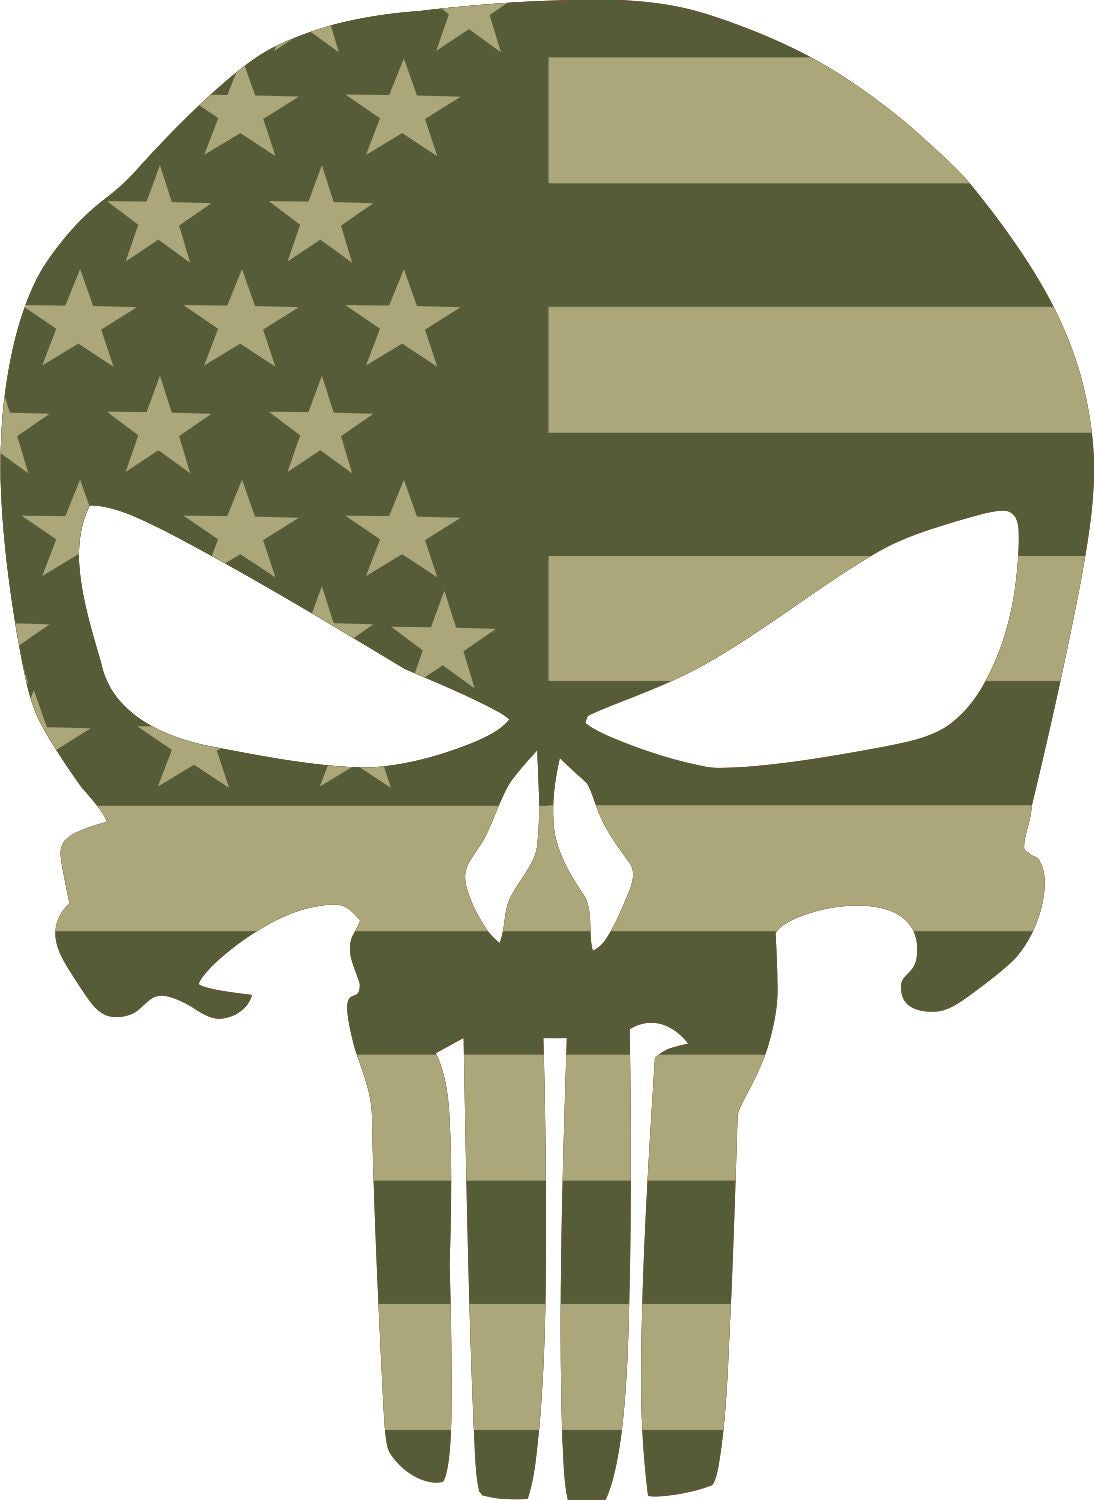 Punisher Skull Reflective Rear Helmet Decal Police Fire EMS Viny  Graphics/Stickers/Decals – dkedecals